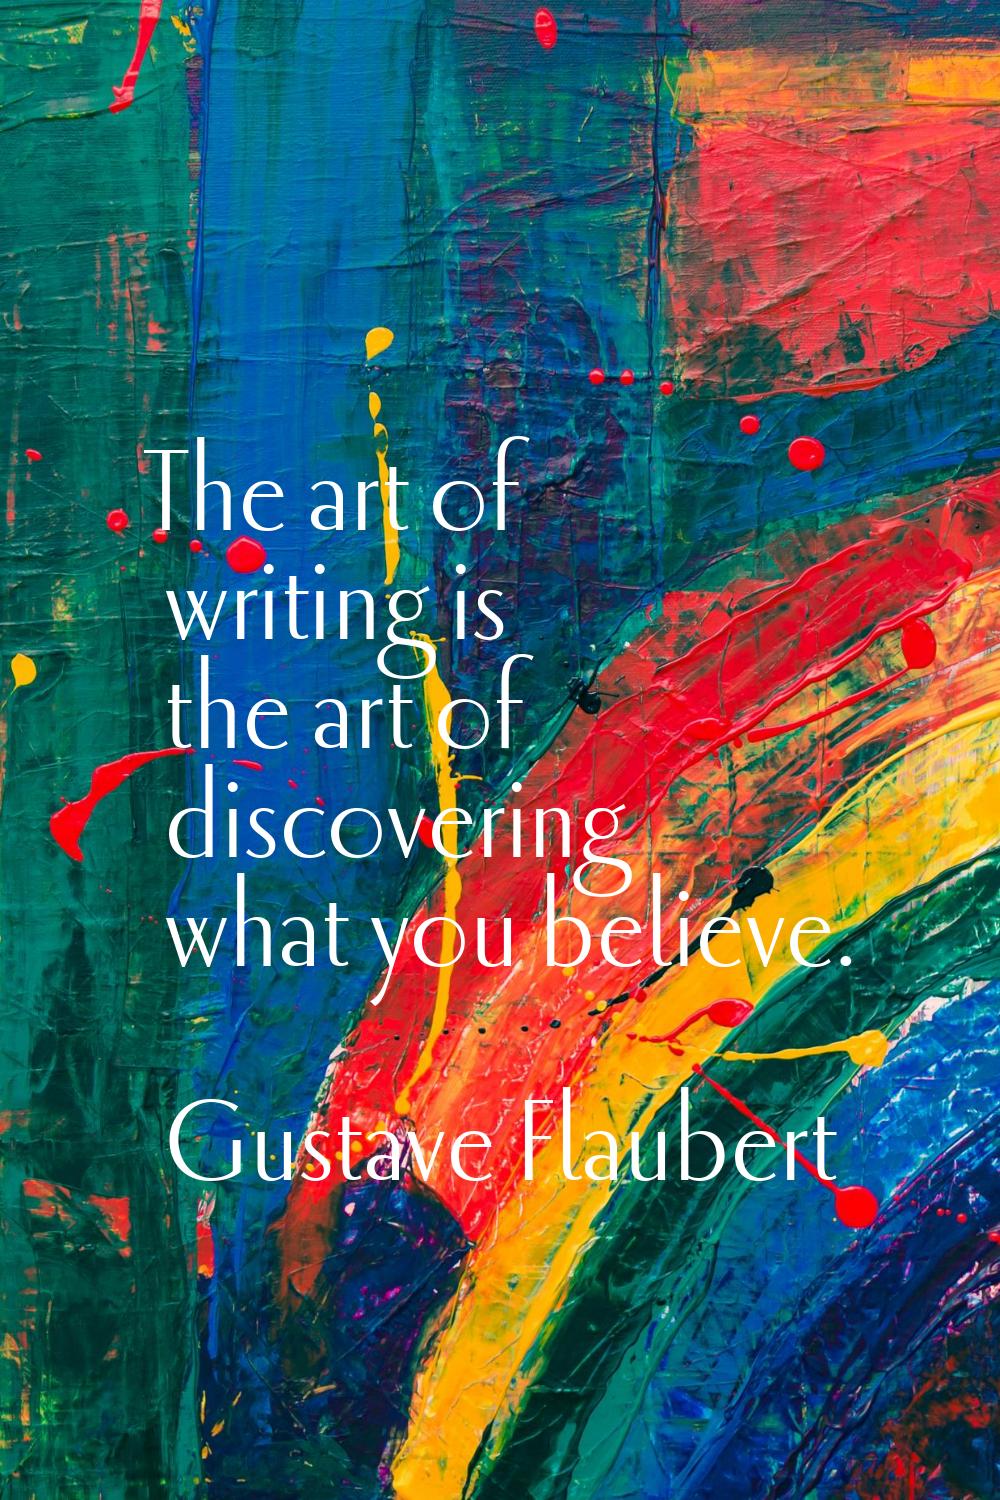 The art of writing is the art of discovering what you believe.